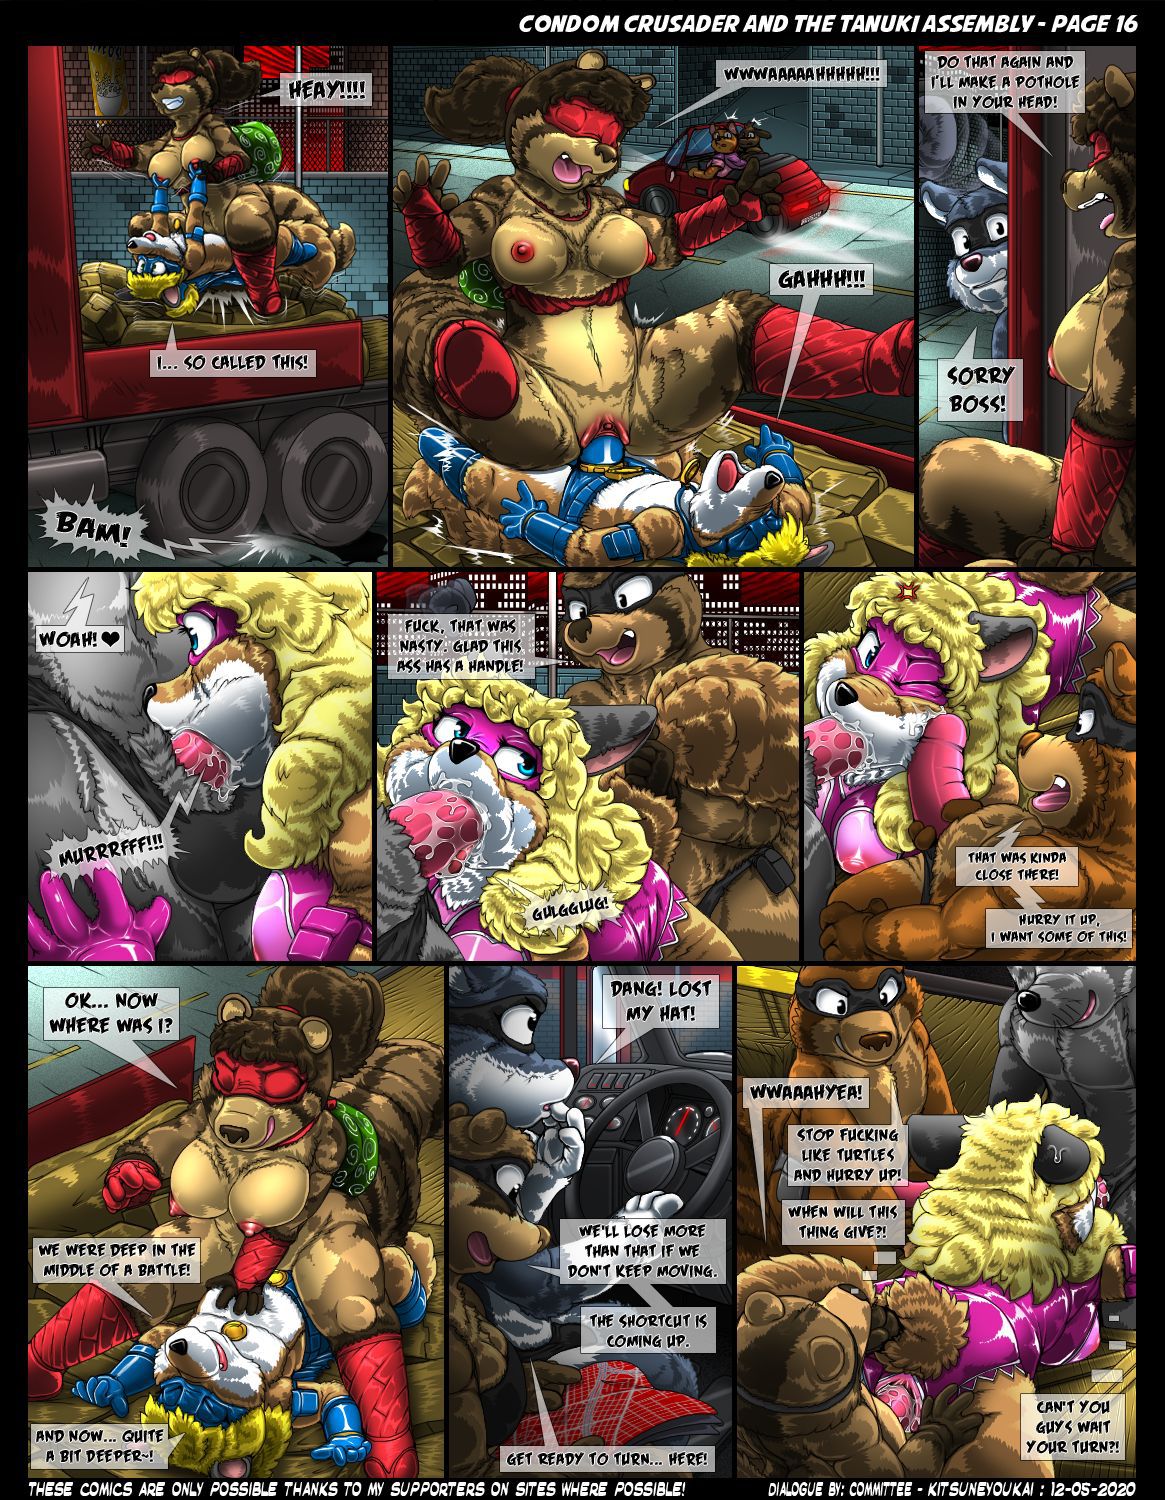 Condom Crusader and the Tanuki Assembly by Kitsune Youkai (Ongoing) 16